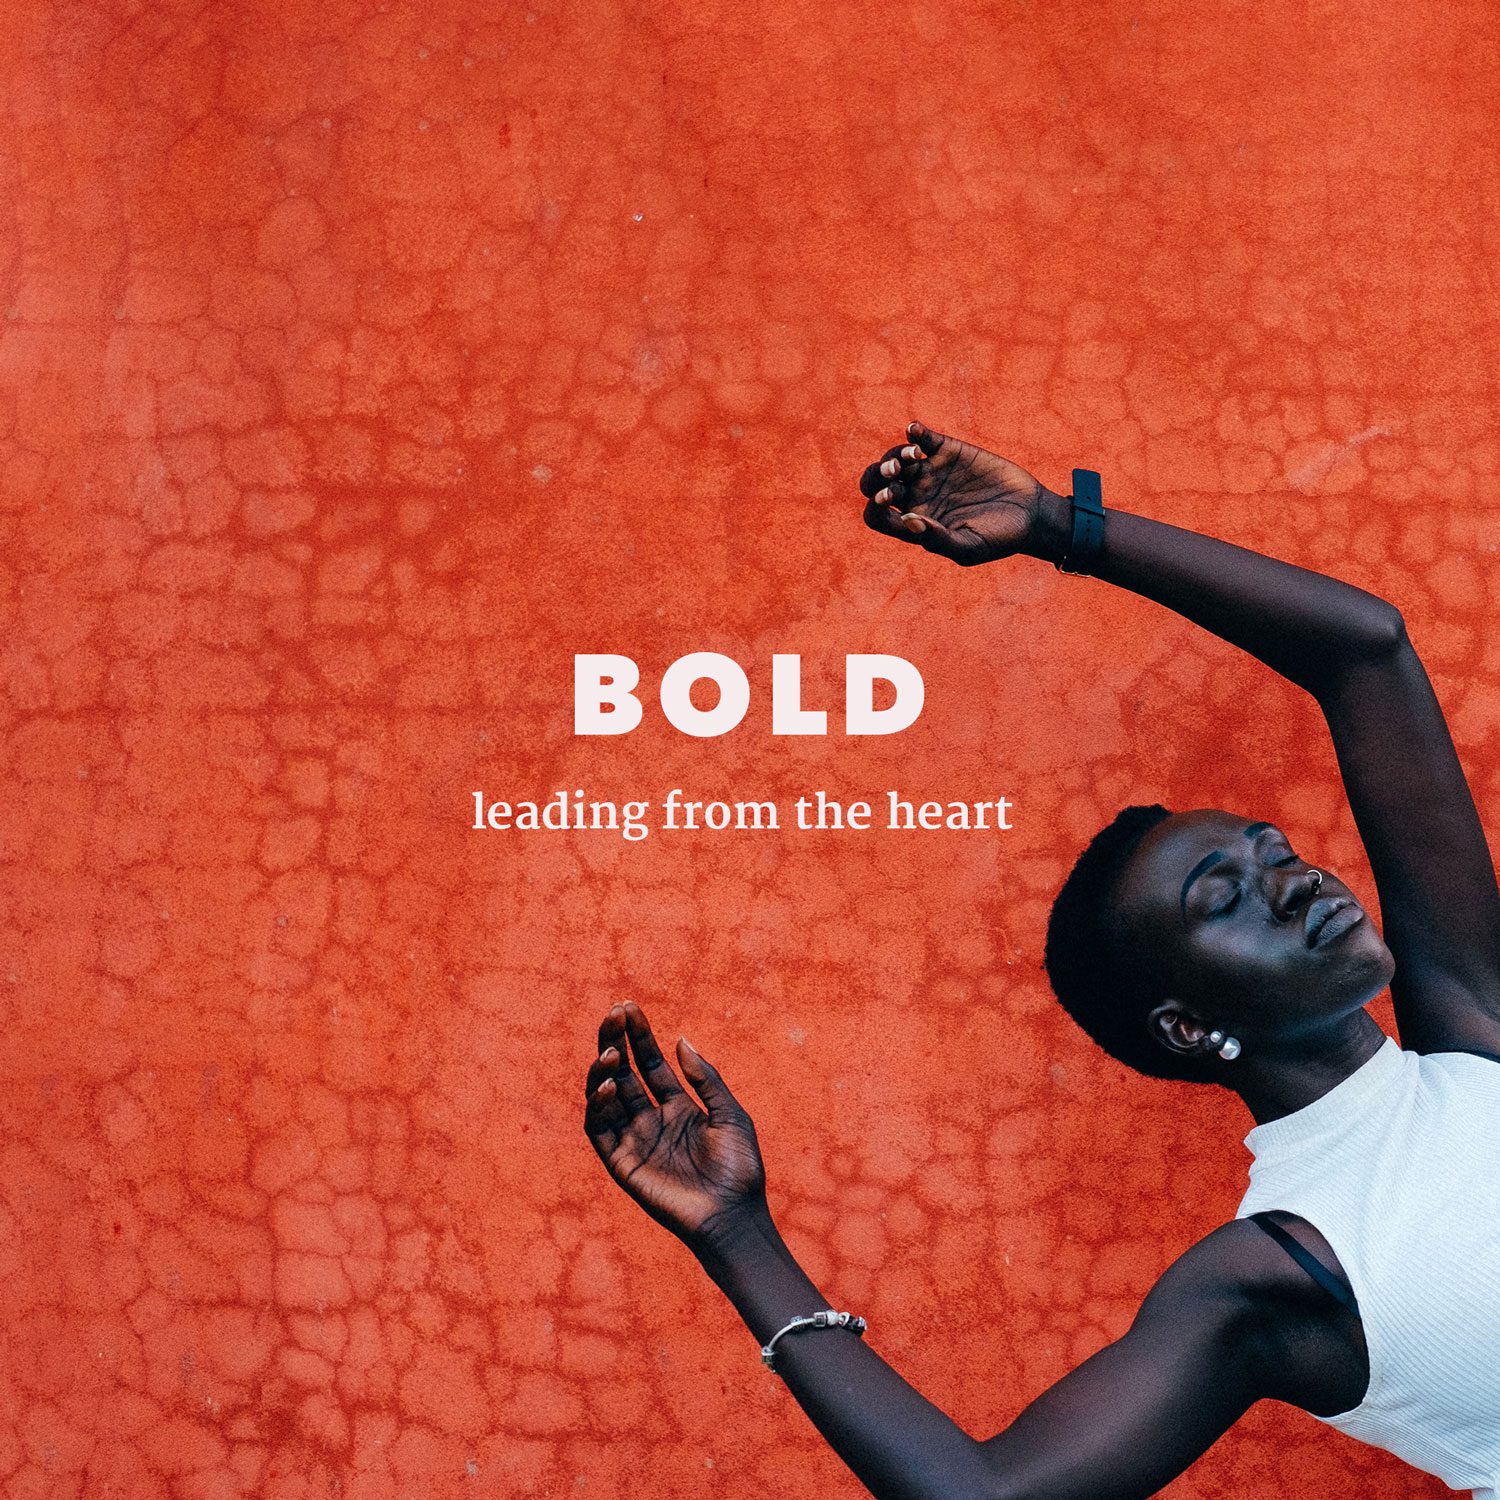 BOLD – leading from the heart